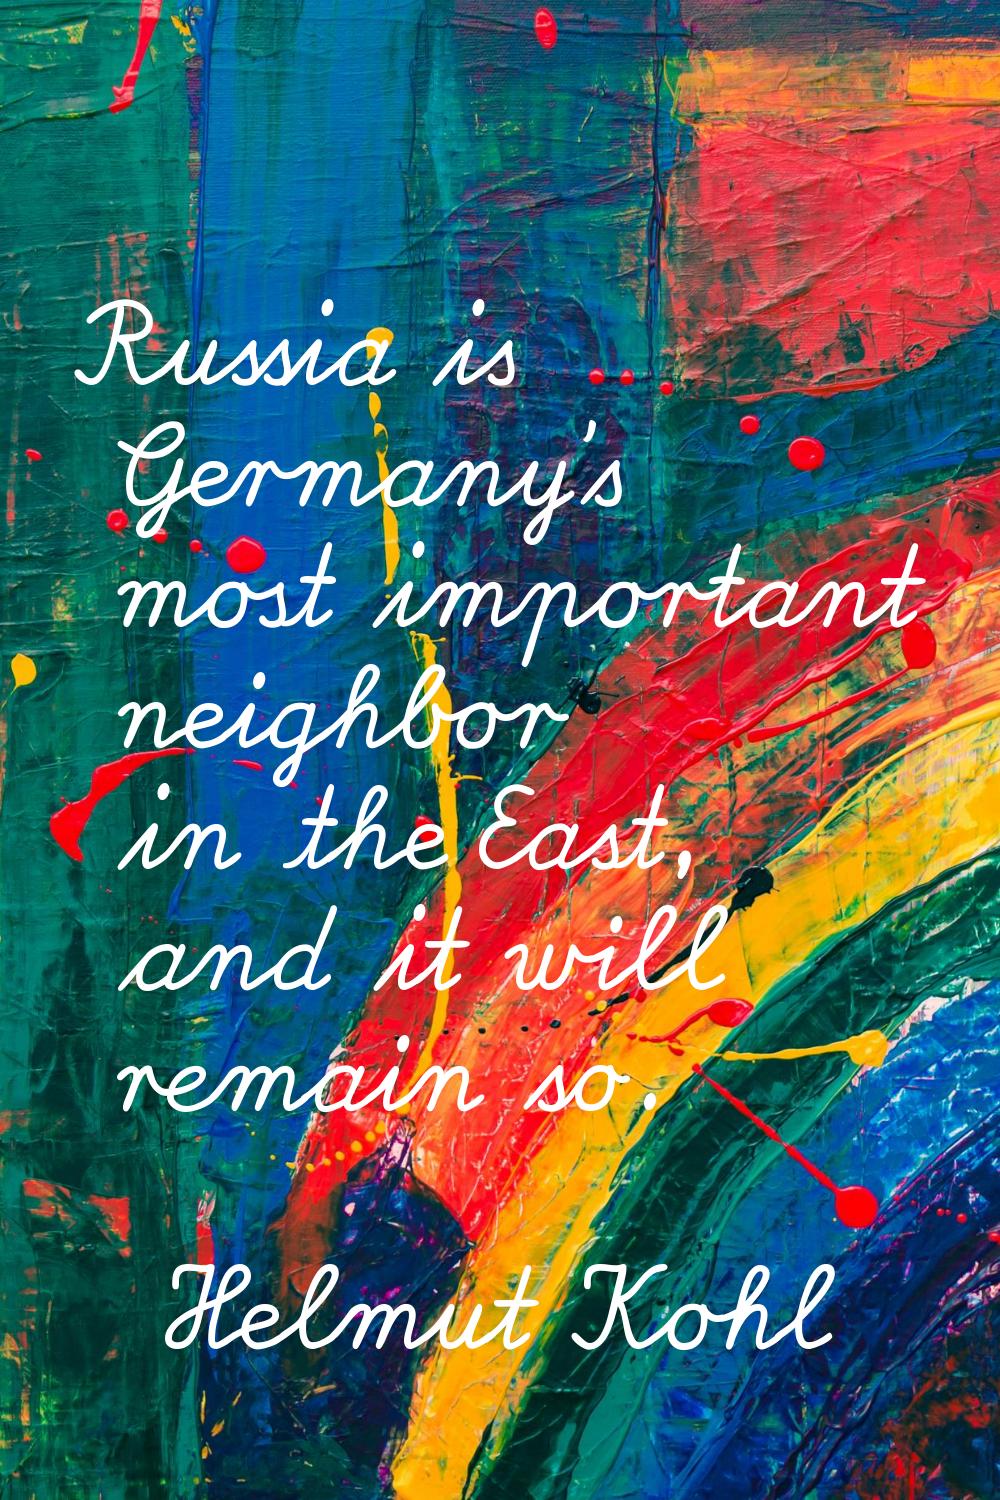 Russia is Germany's most important neighbor in the East, and it will remain so.